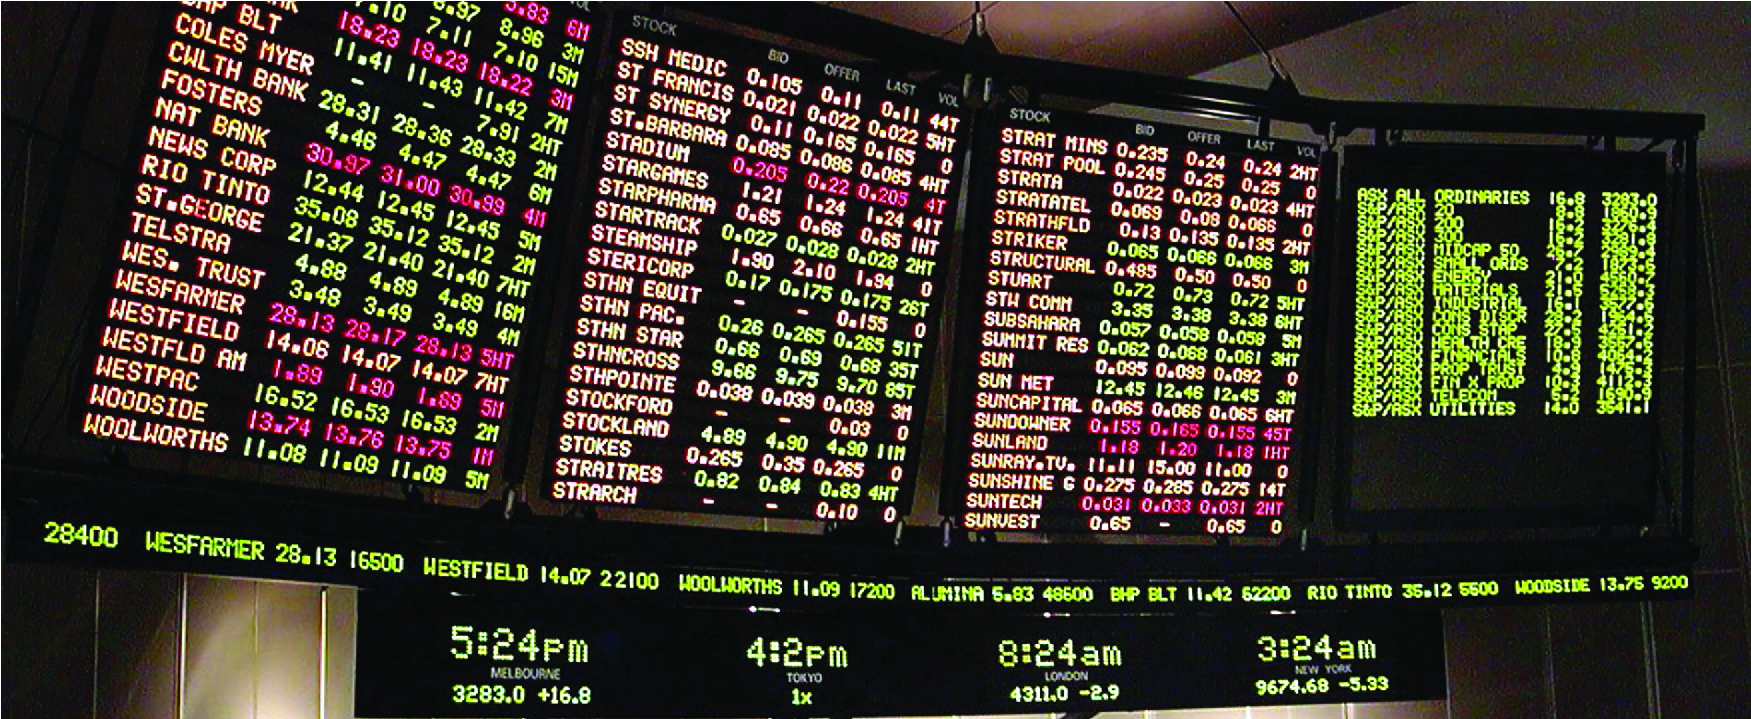 A picture of a large electronic stock exchange board.